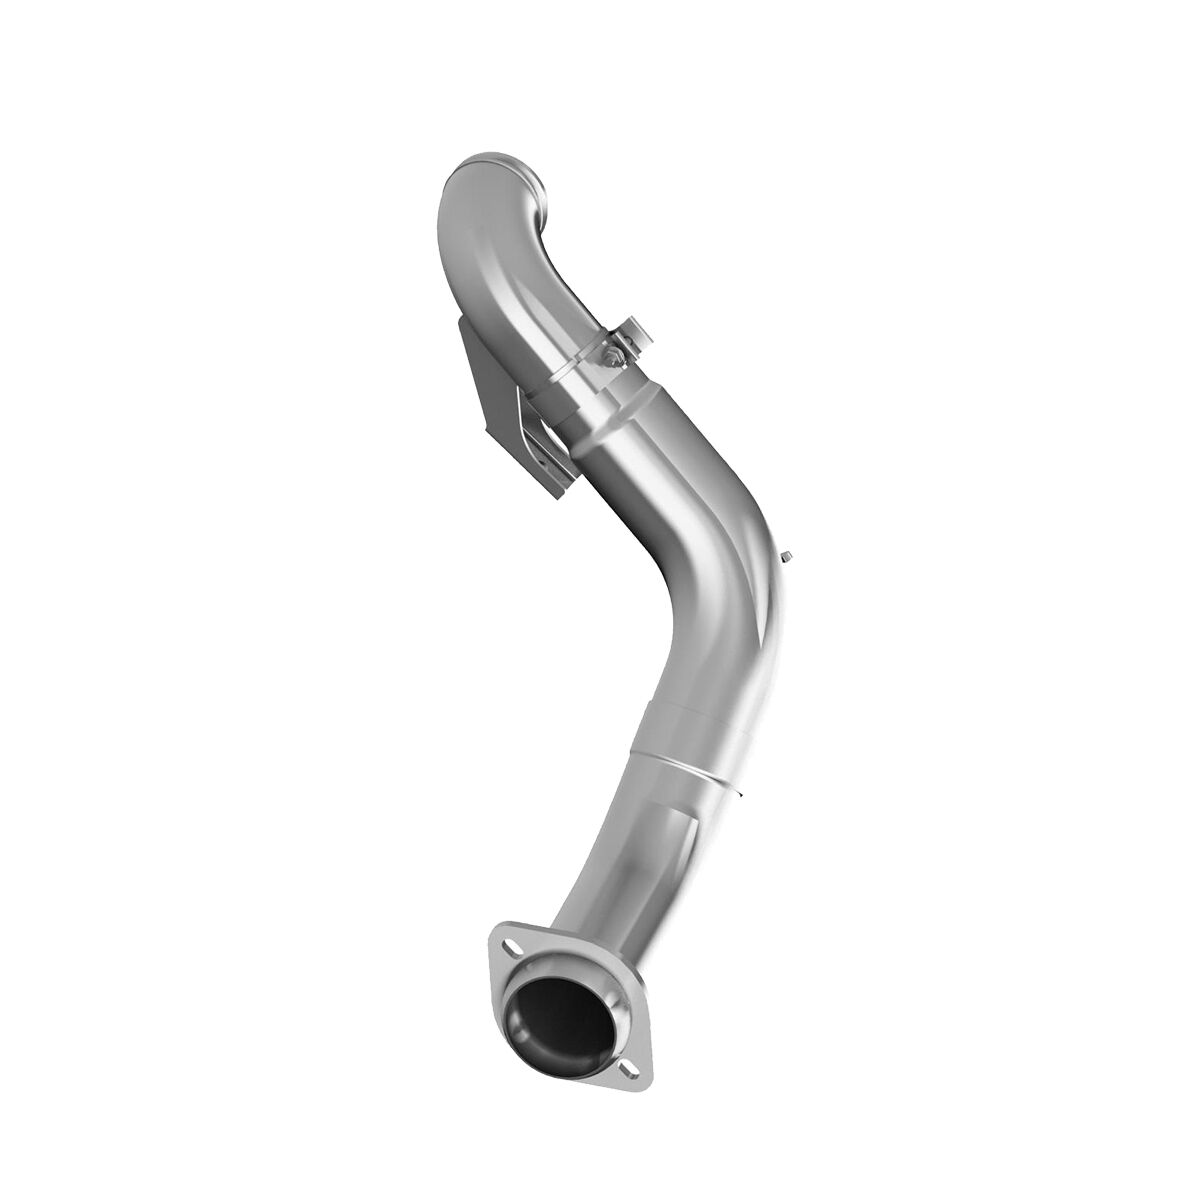 Show details for MBRP Exhaust FAL460 Turbocharger Down Pipe